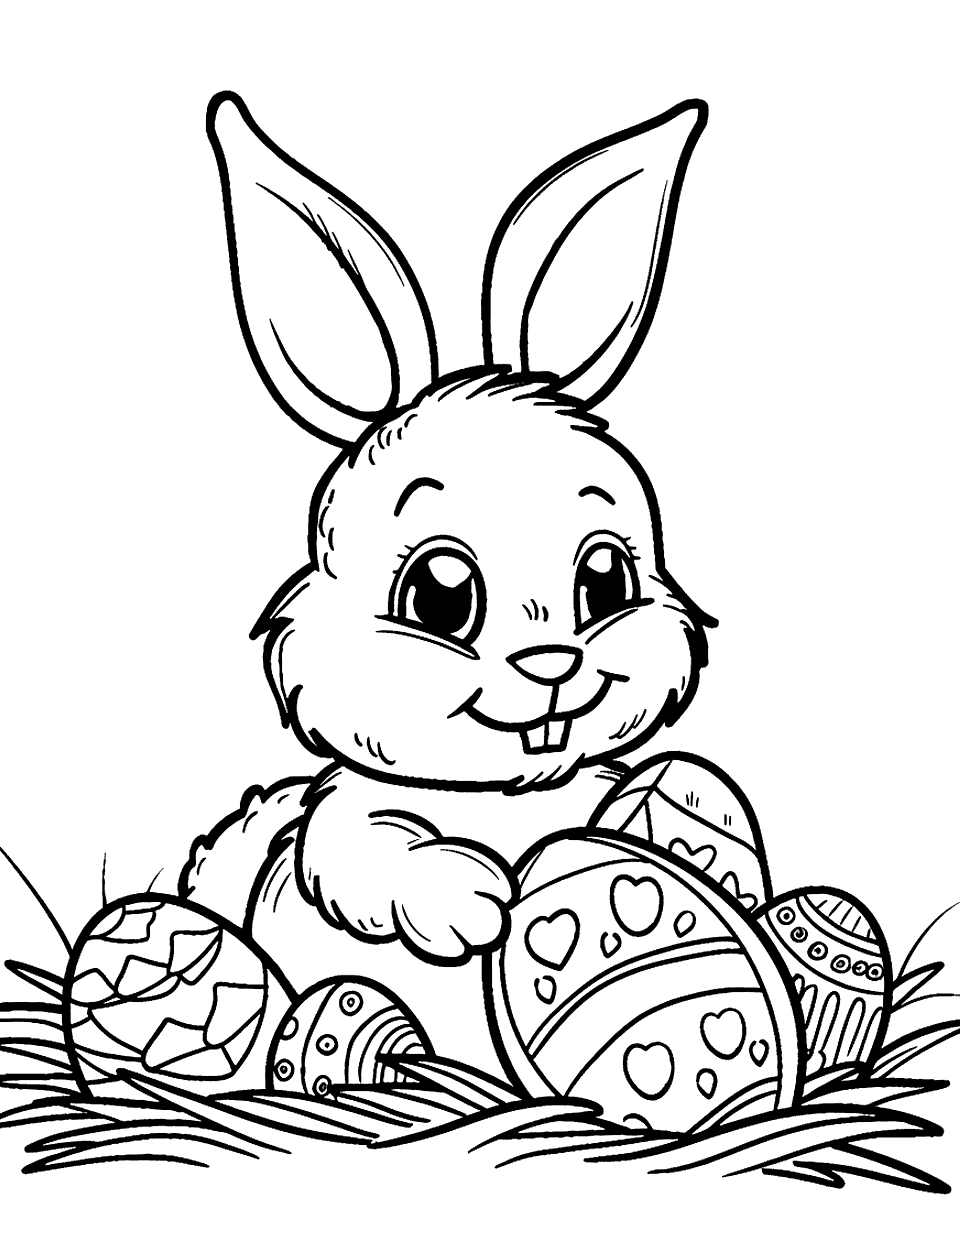 Baby Bunny's First Easter Bunny Coloring Page - A small, baby bunny surrounded by a few Easter eggs, looking curious and playful.